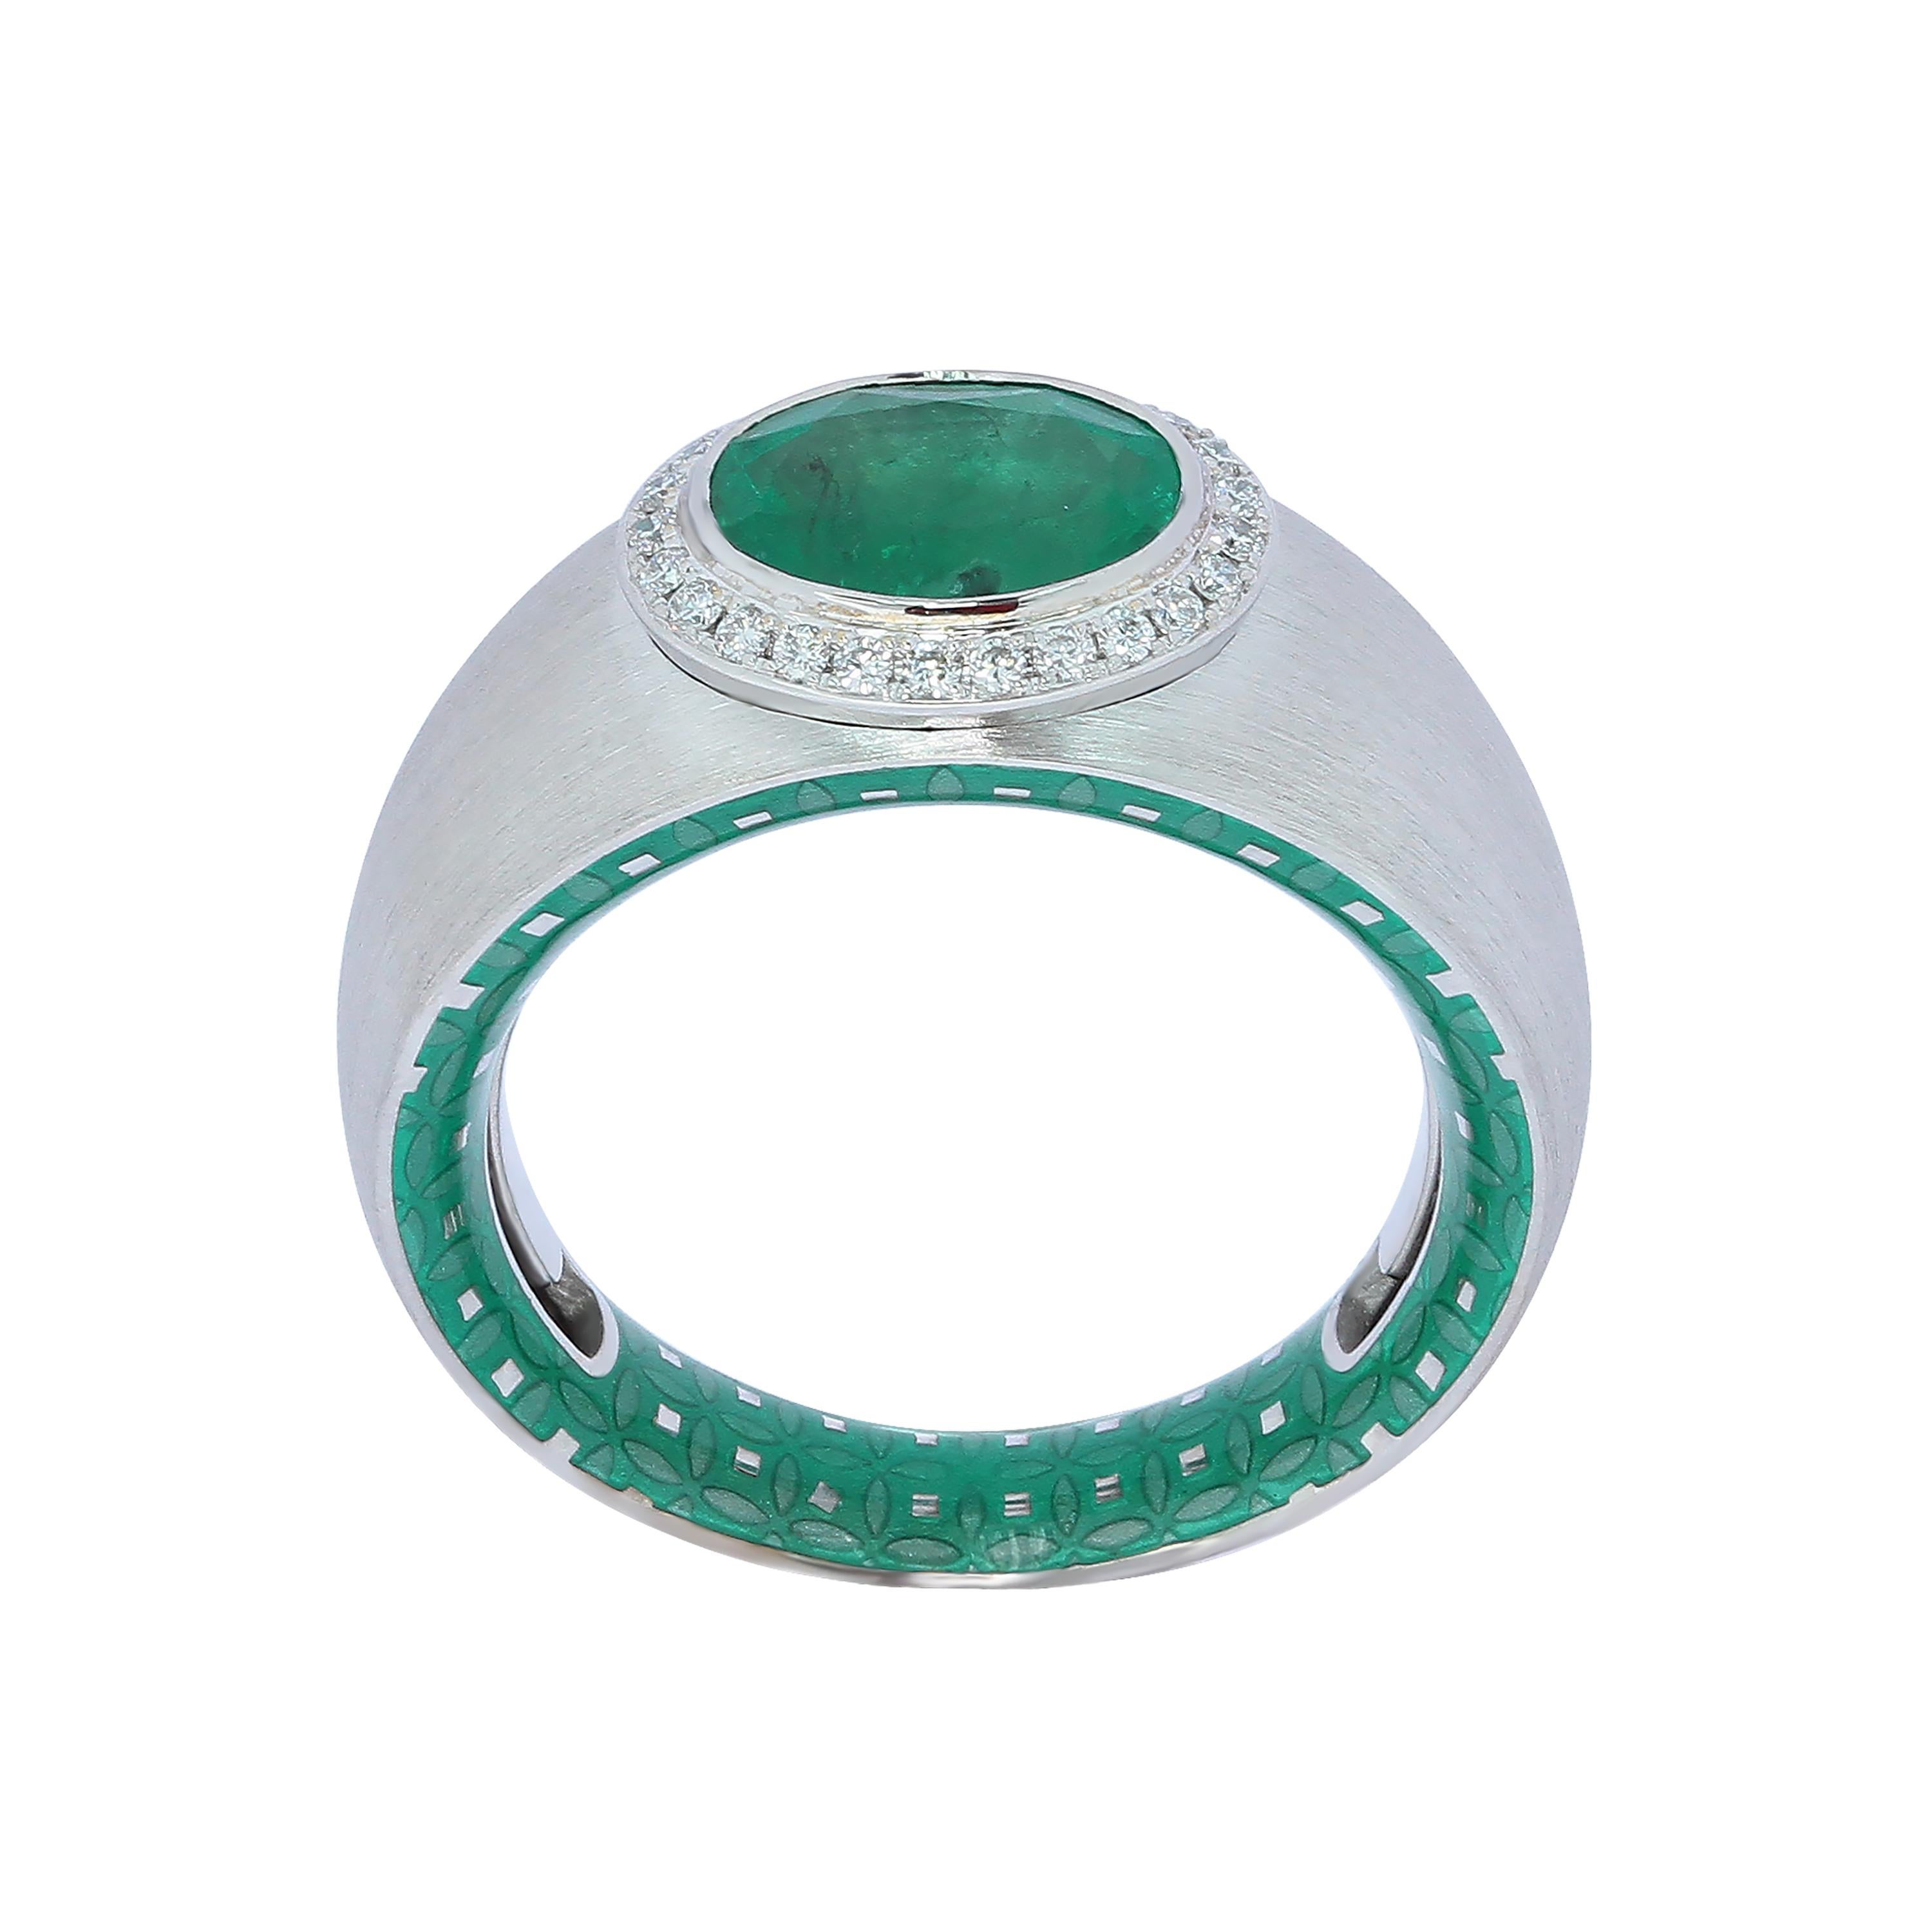 Emerald 1.78 Carat Diamond Enamel 18 Karat White Gold Ring
Please take a look at one of our trade mark texture in Kaleidoscope Collection - 